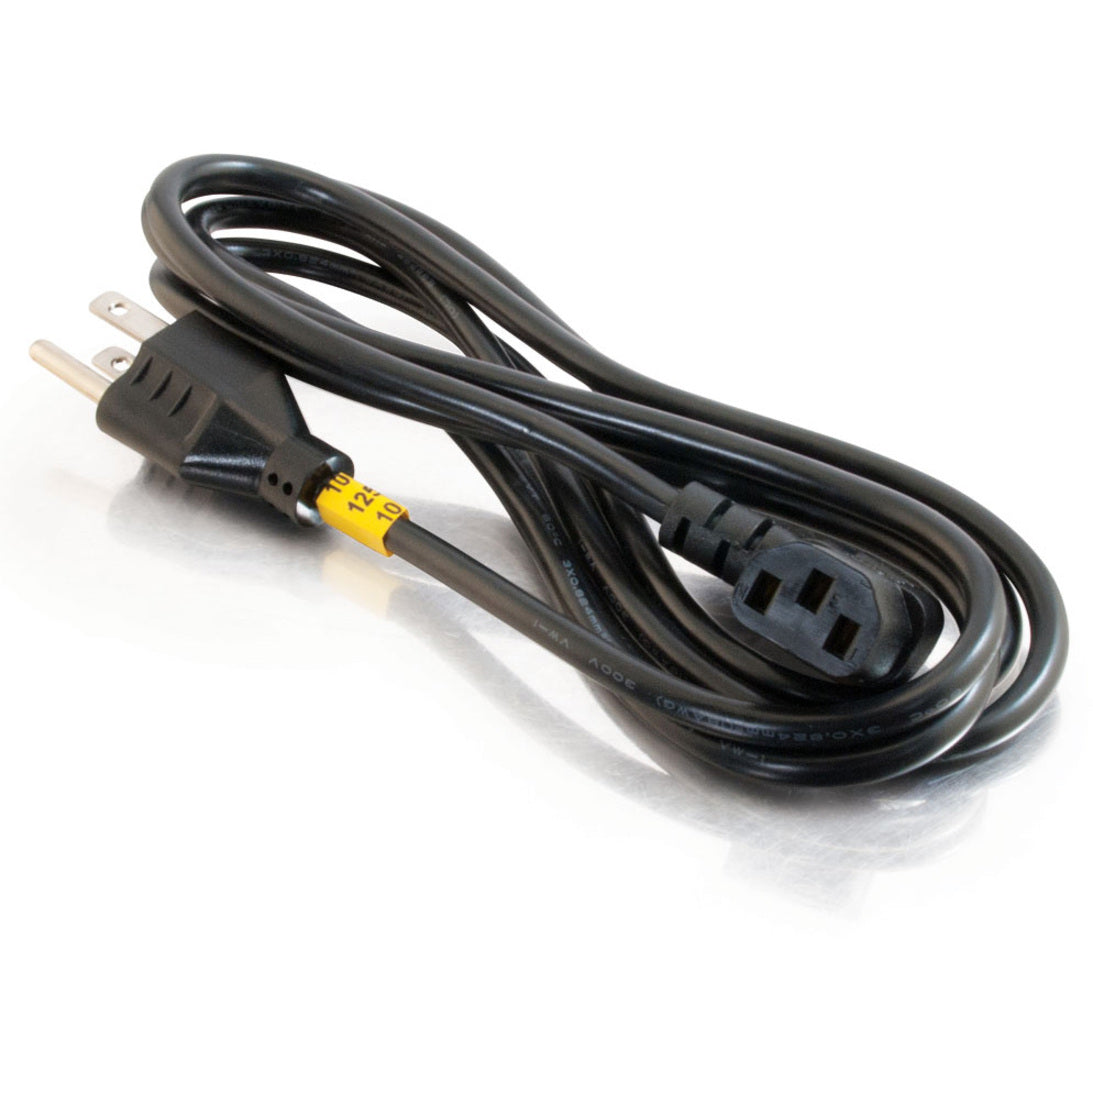 C2G 27909 10ft 18 AWG Universal Right Angle Power Cord, Lifetime Warranty, Black